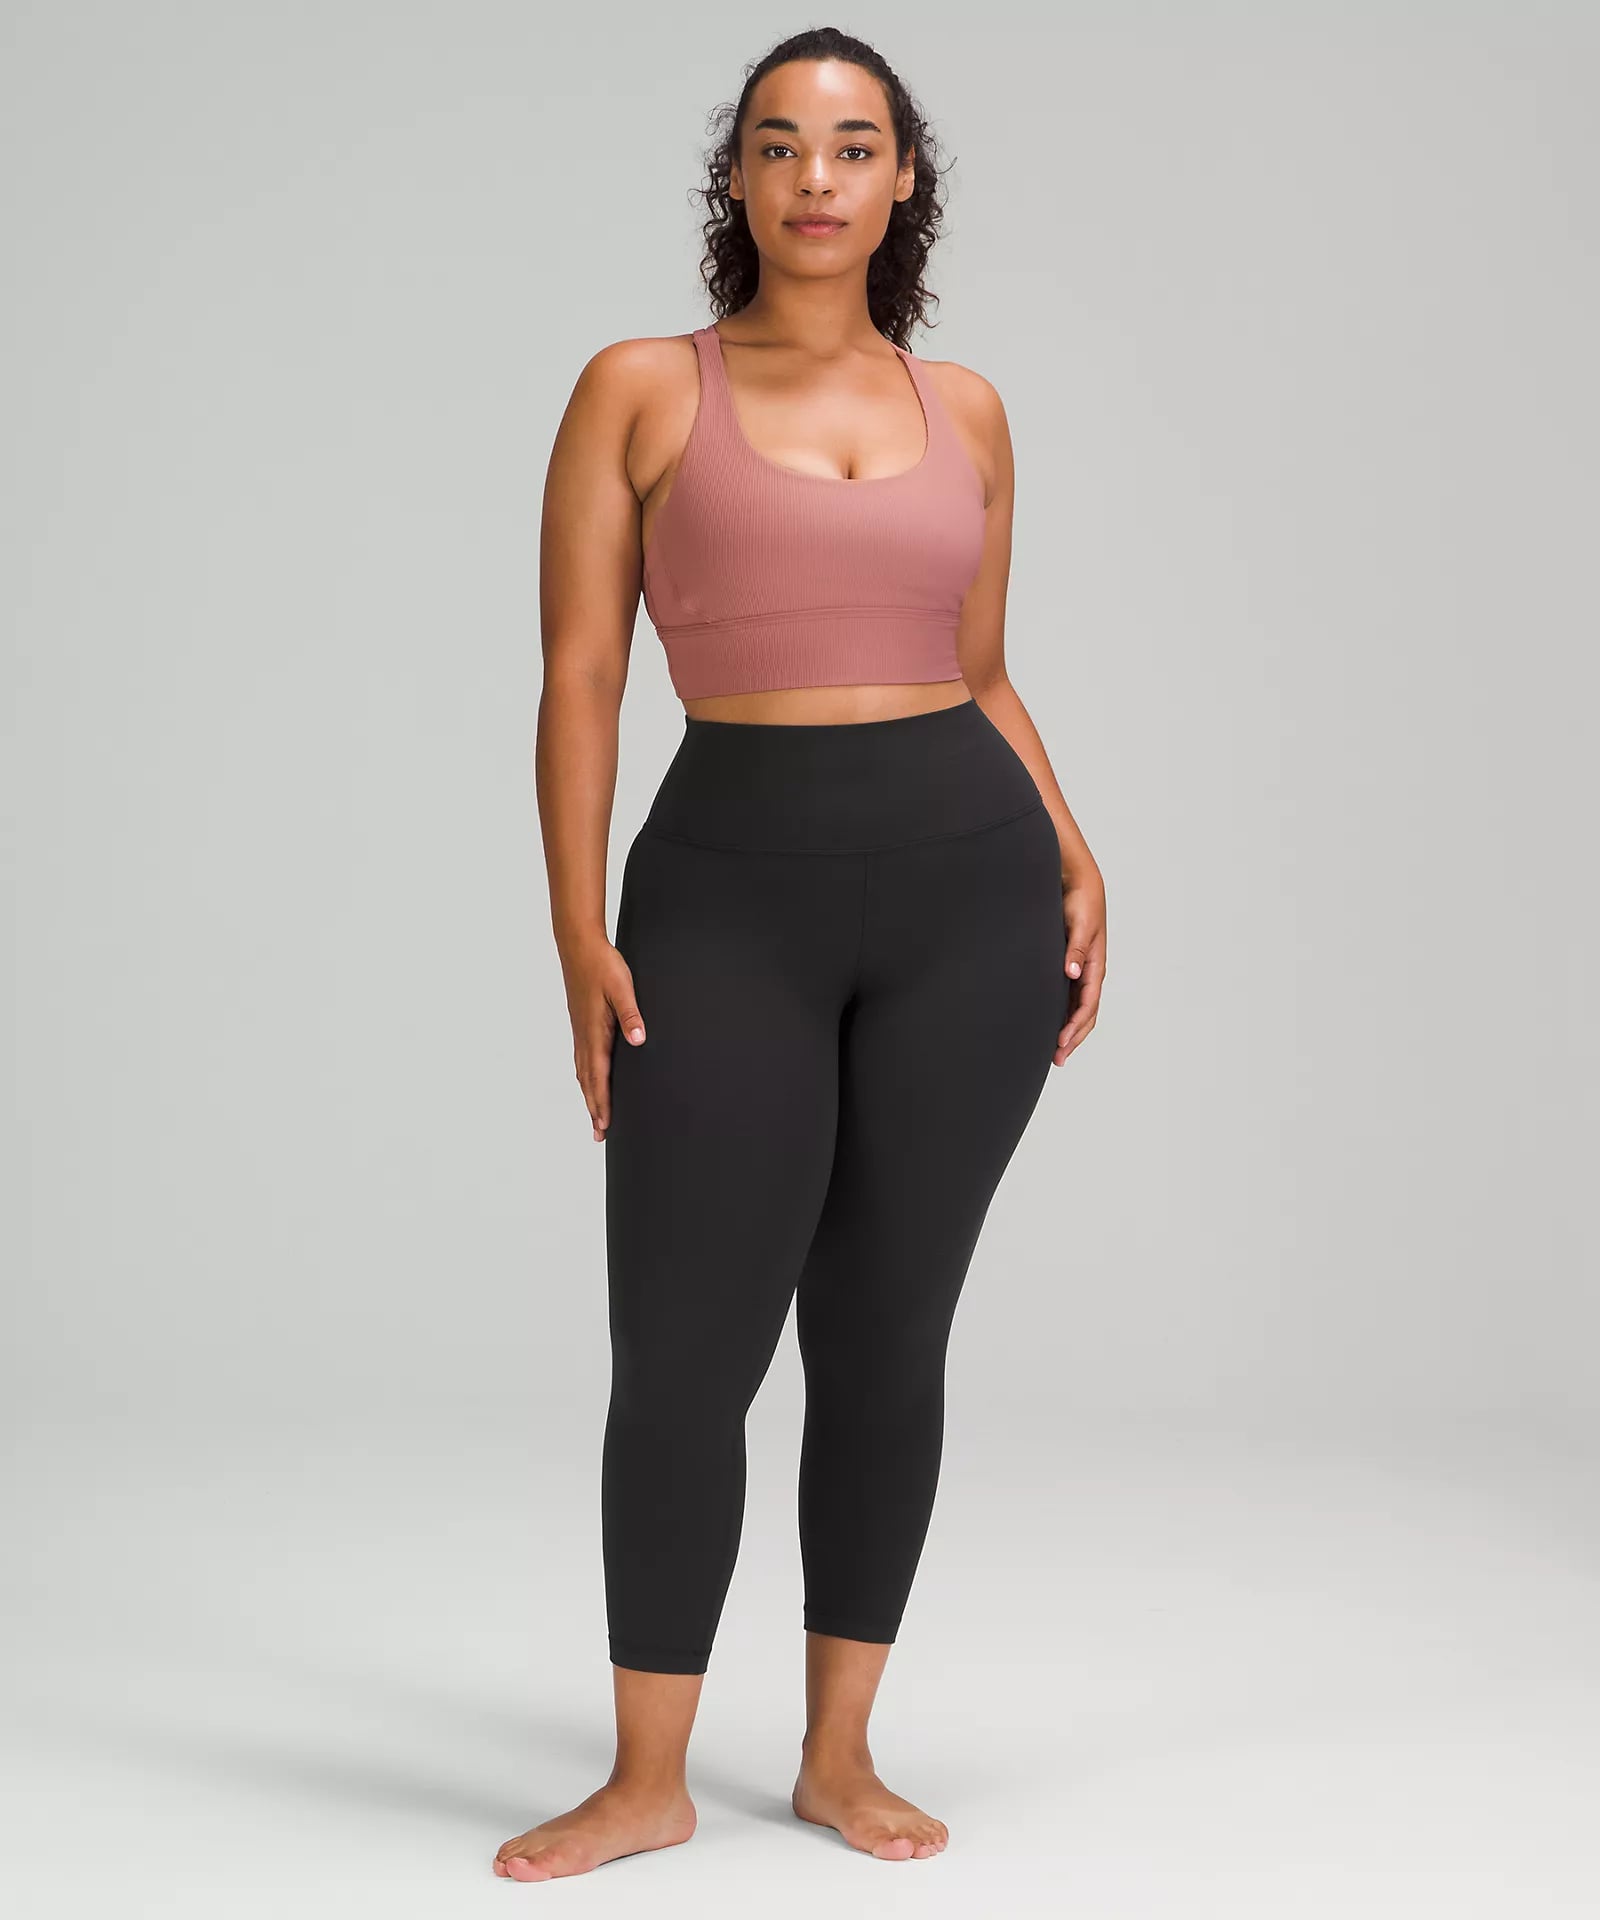 Lululemon athletica Fast and Free High-Rise Crop 23 Pockets